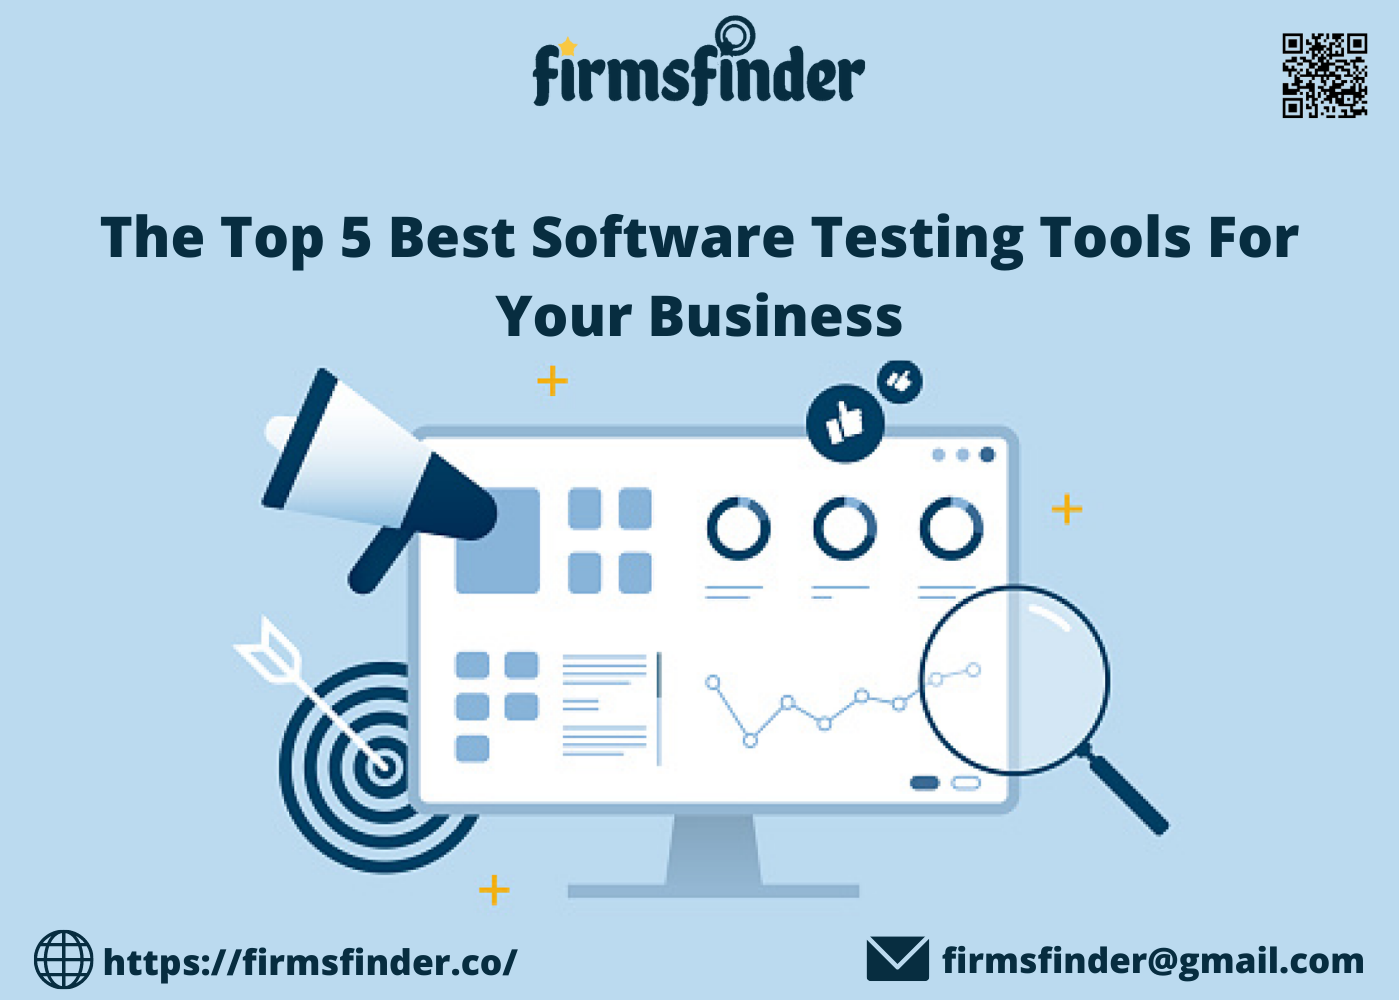 The Top 5 Best Software Testing Tools For Your Business